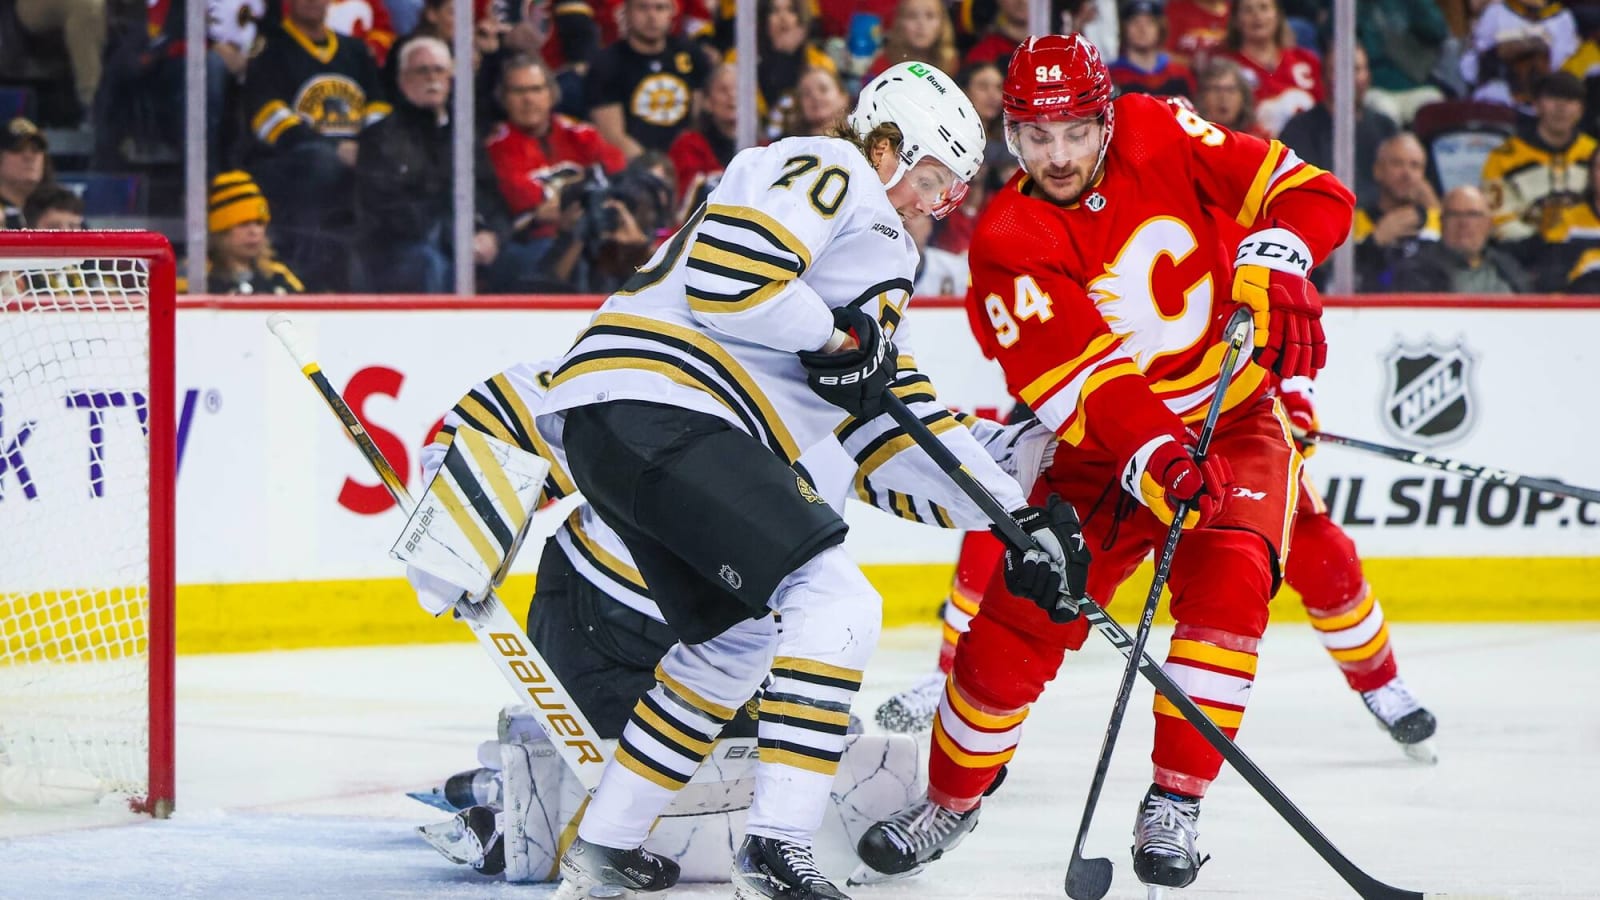 Flames win a battle with the Bruins in extra time